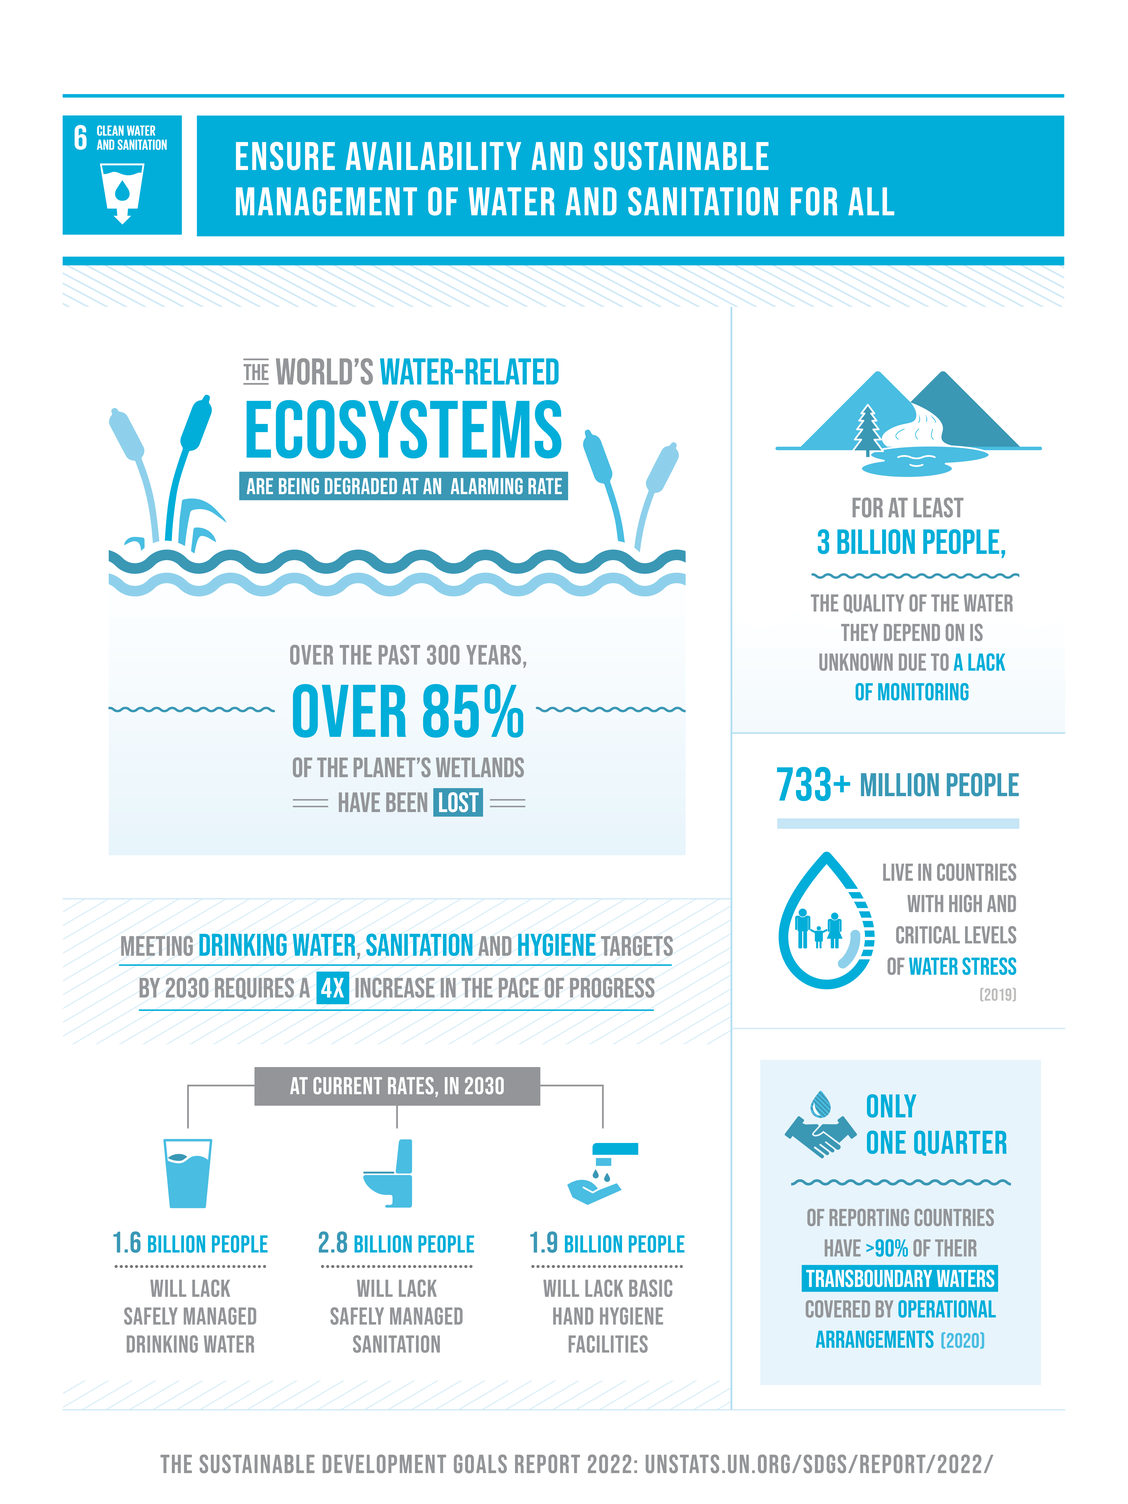 Infographic for SDG 6: Clean Water and Sanitation. Ensure availability and sustainable management of water and sanitation for all.  Images and text provide statistics illustrating the biggest challenges to safe drinking water and adequate sanitation around the world.